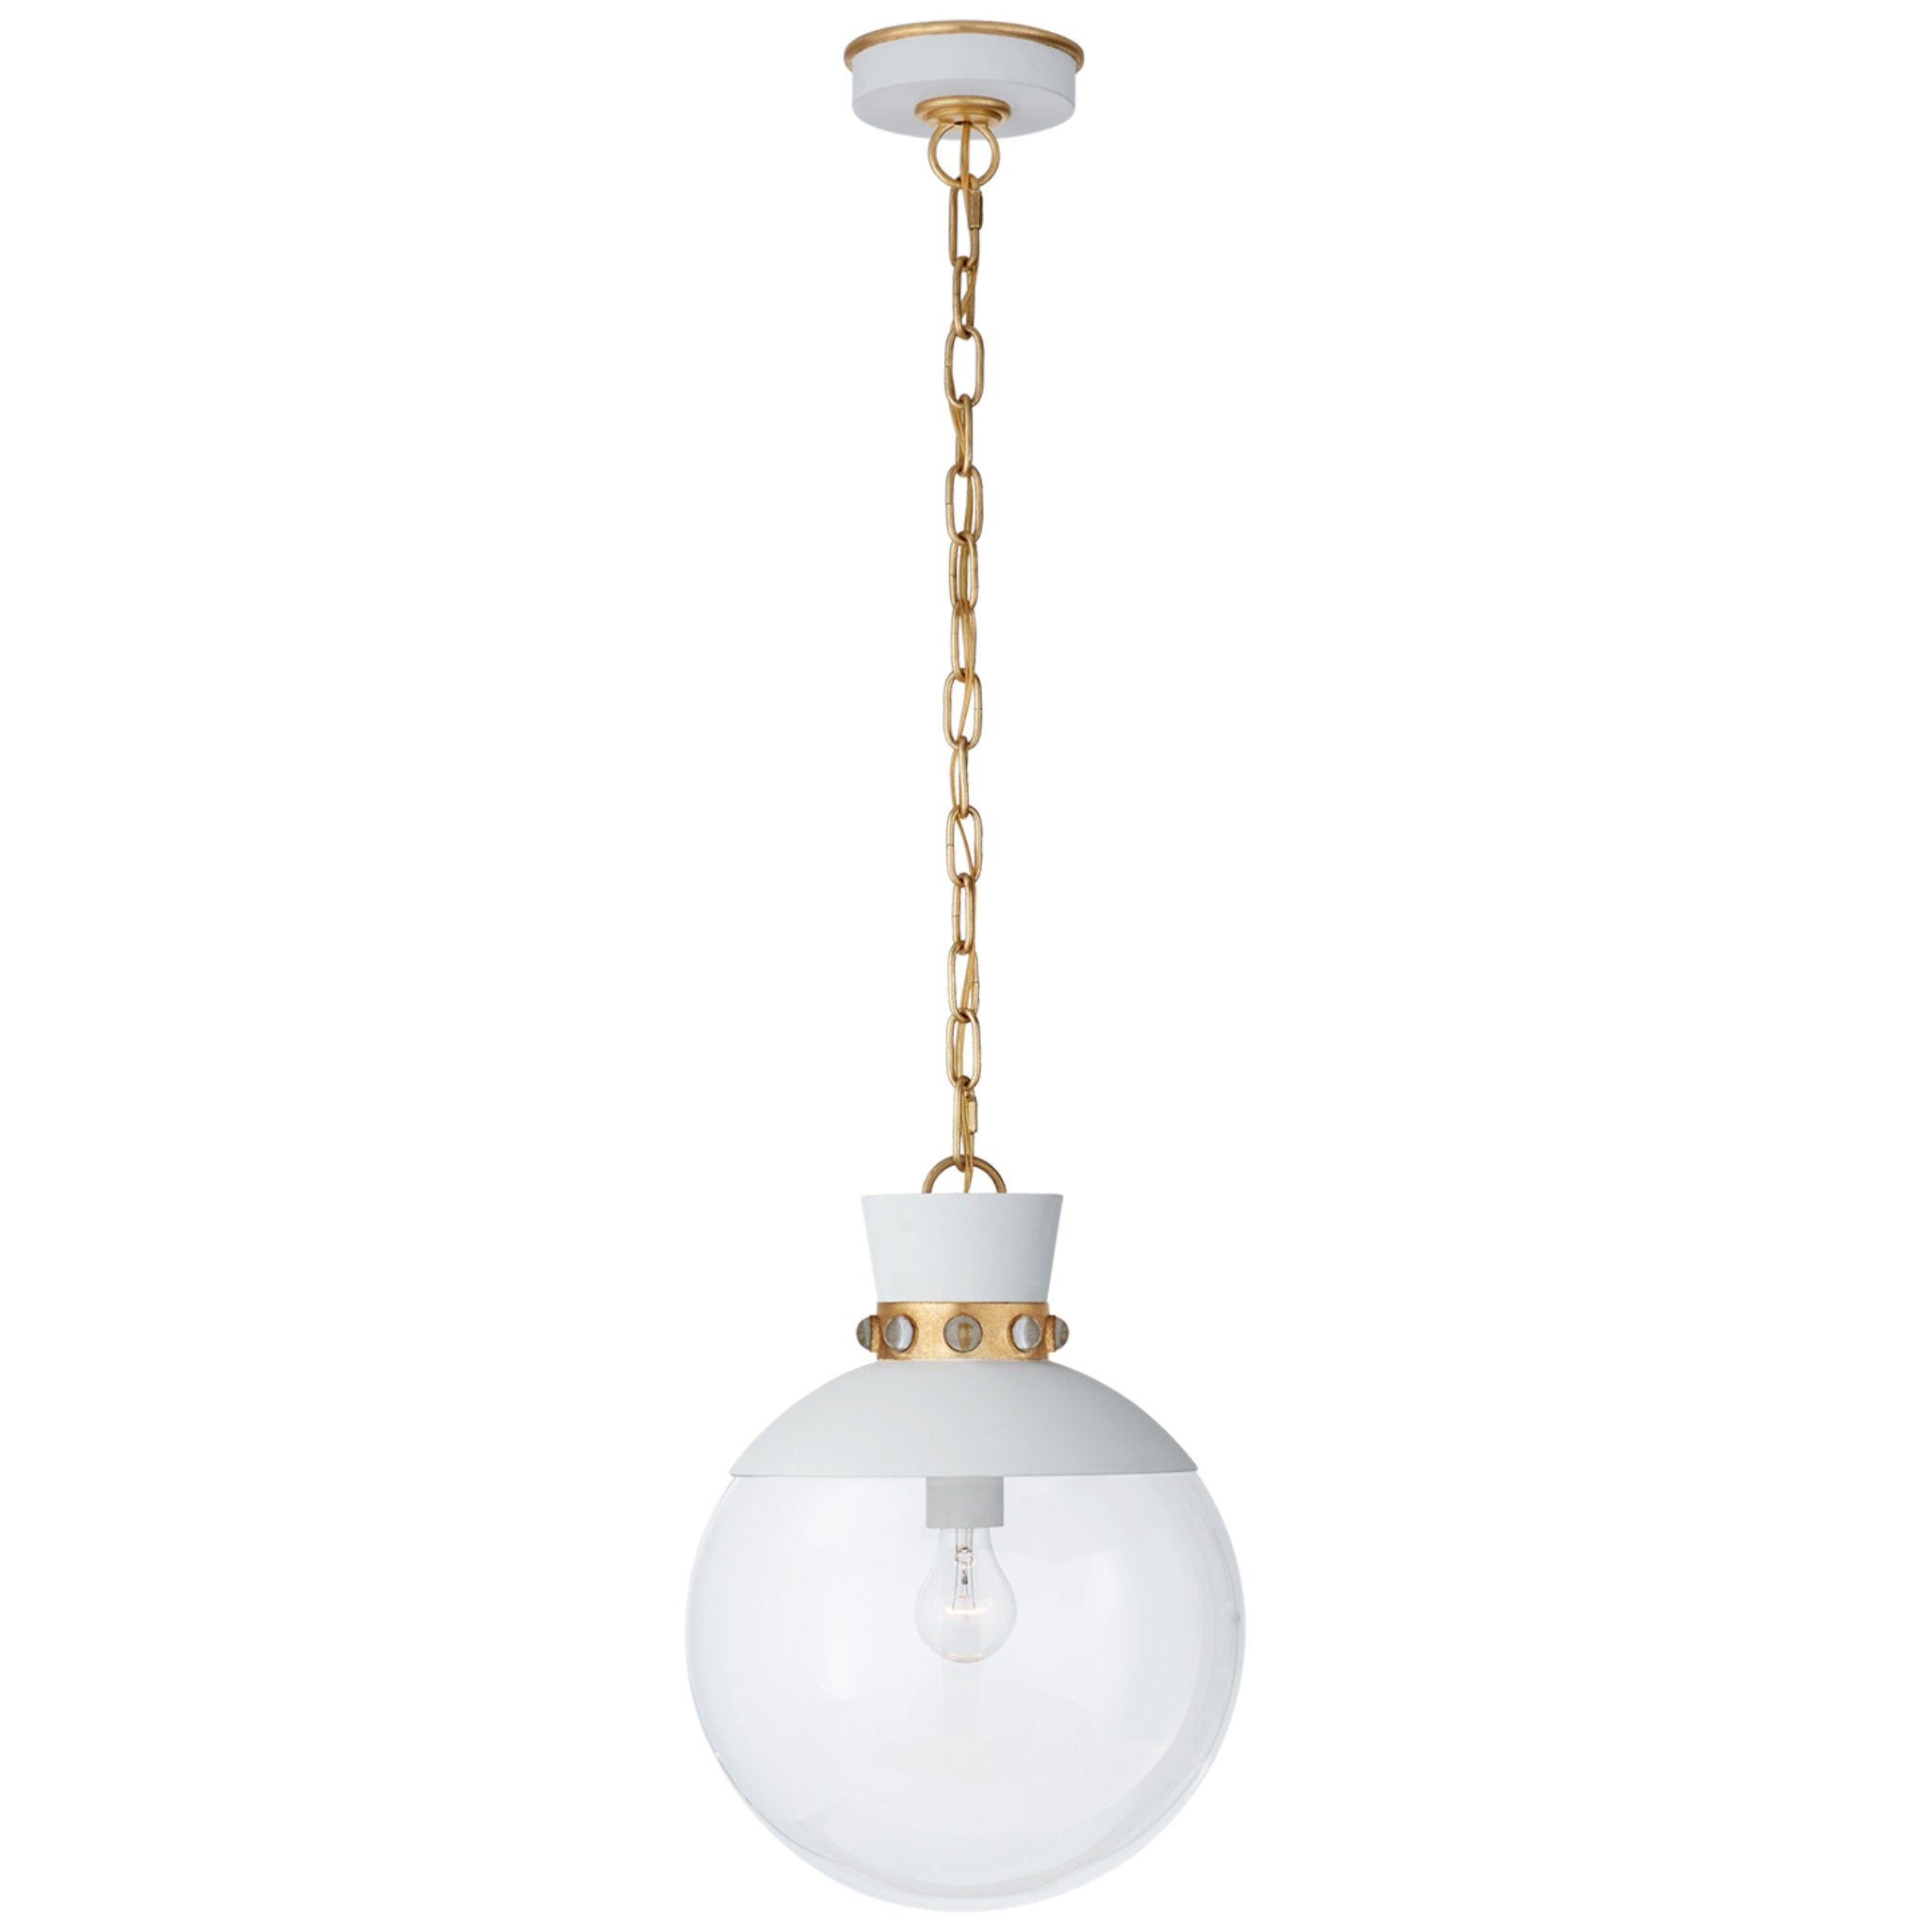 Julie Neill Lucia Medium Pendant in Matte White and Gild with Clear Glass